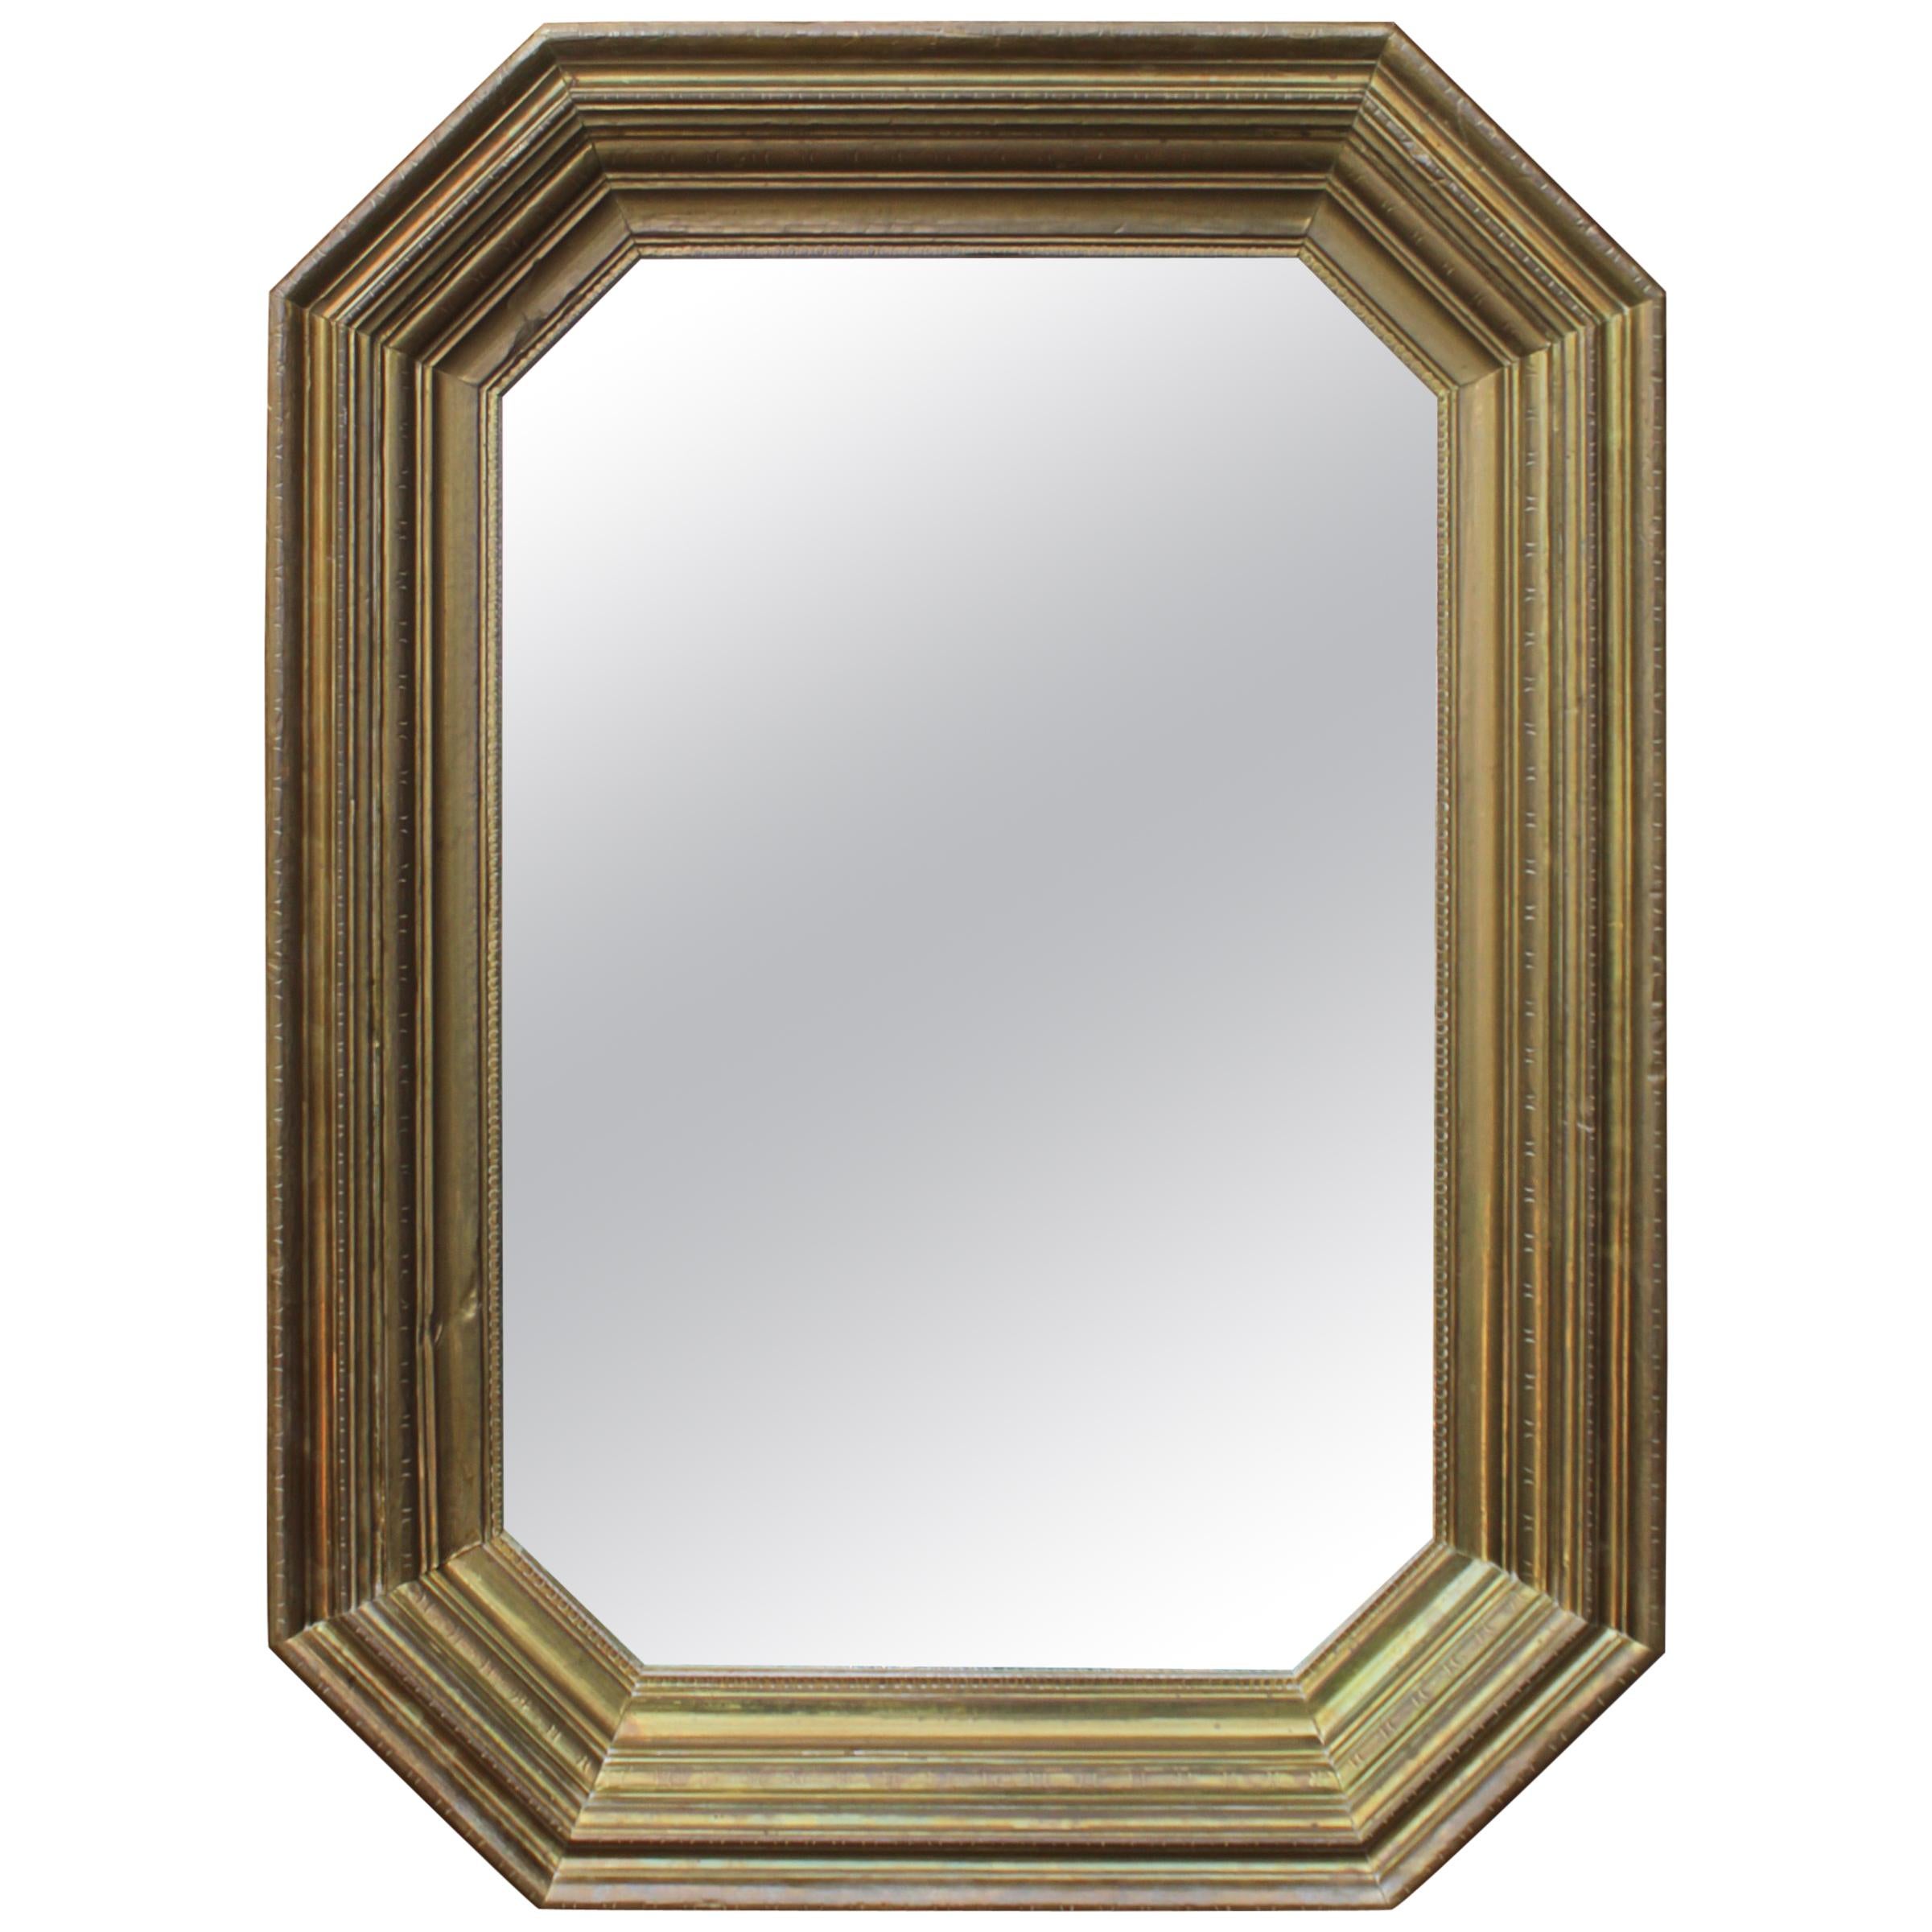 1970s Rodolfo Dubarry Handcrafted Gilded Brass over Wooden Frame Mirror